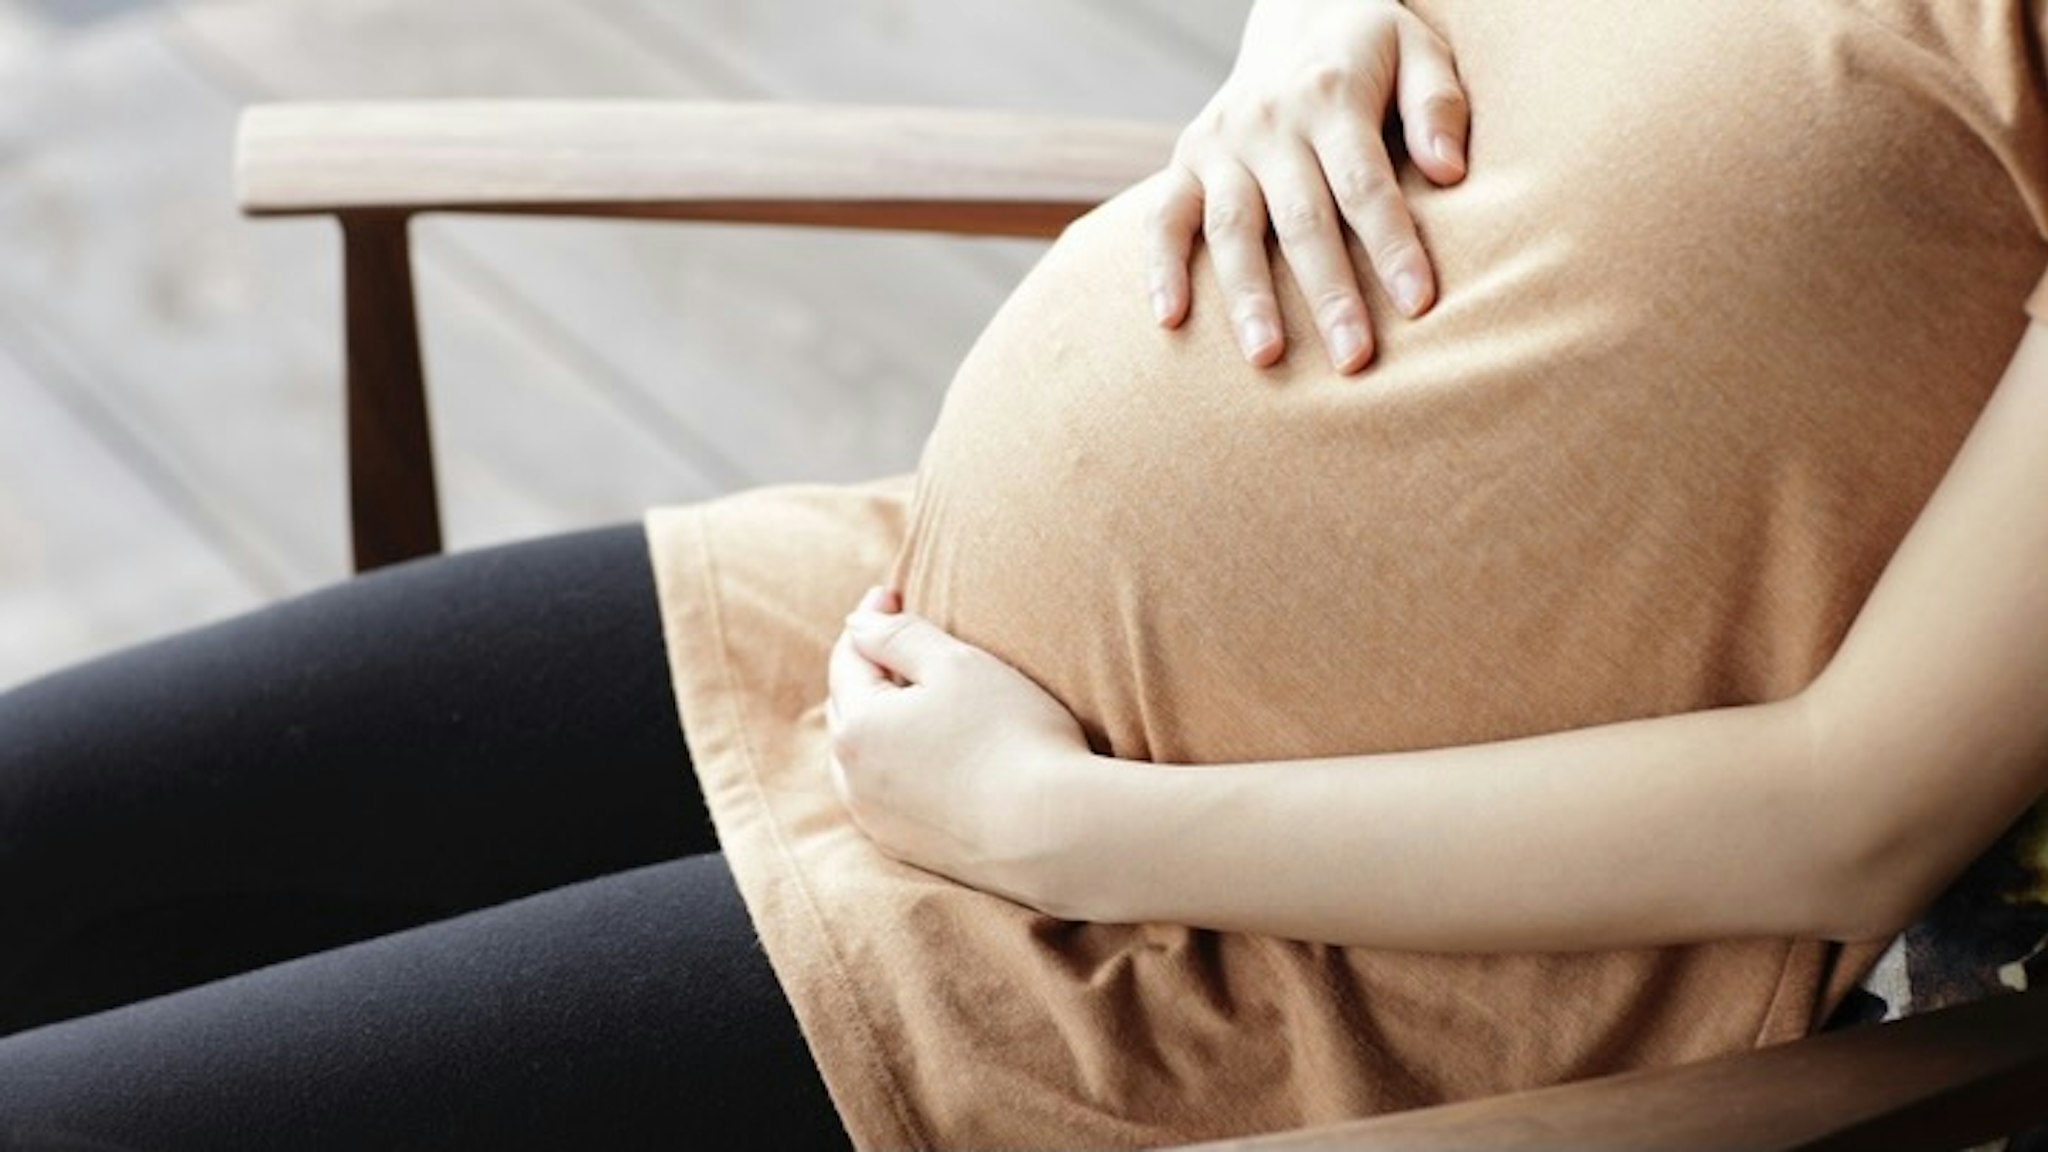 Pregnant woman touching abdomen sitting chair - stock photo sot via Getty Images